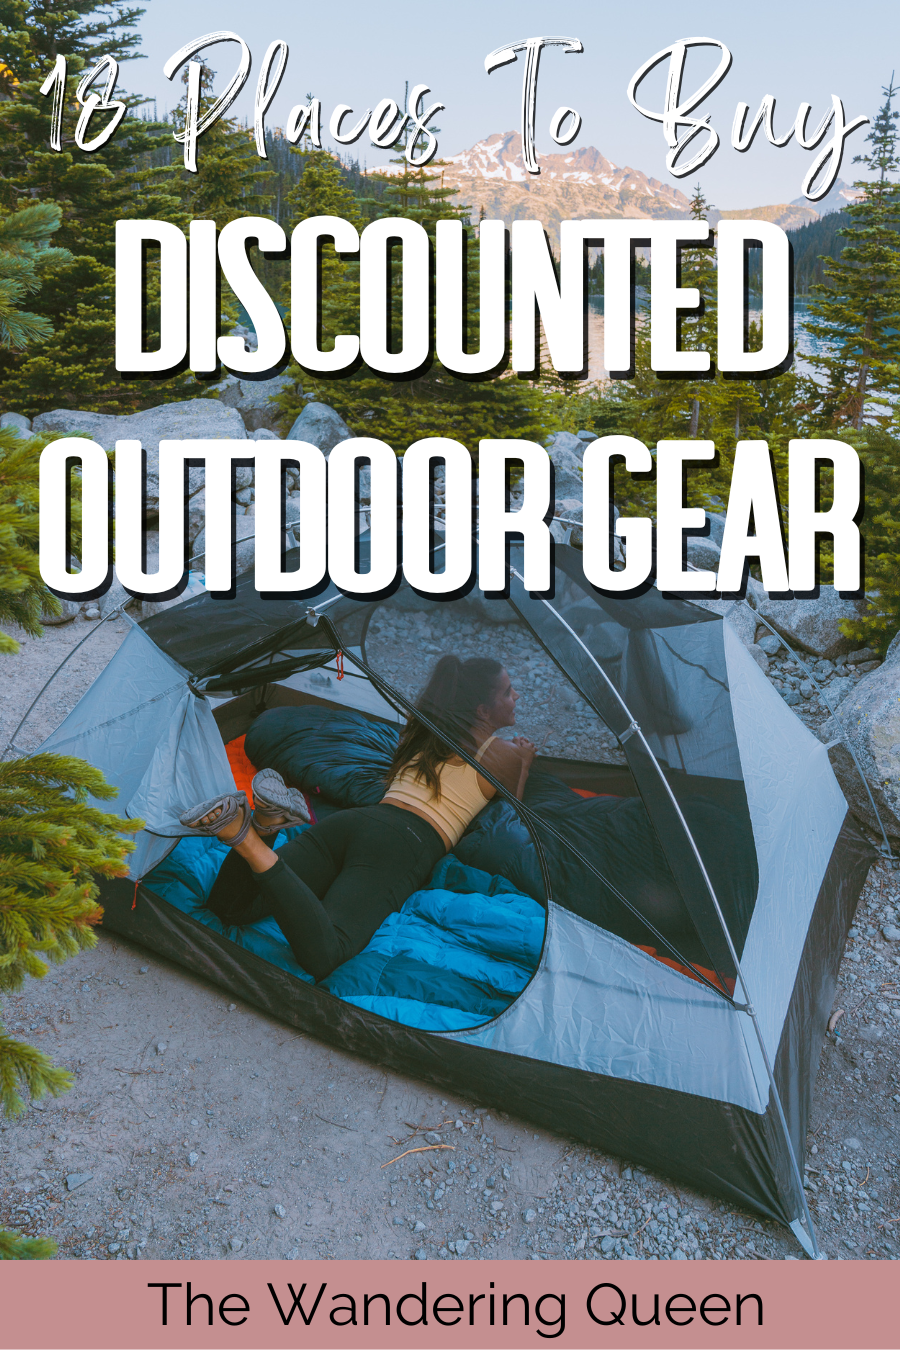 18 Best Places To Buy Discounted Outdoor Gear - The Wandering Queen